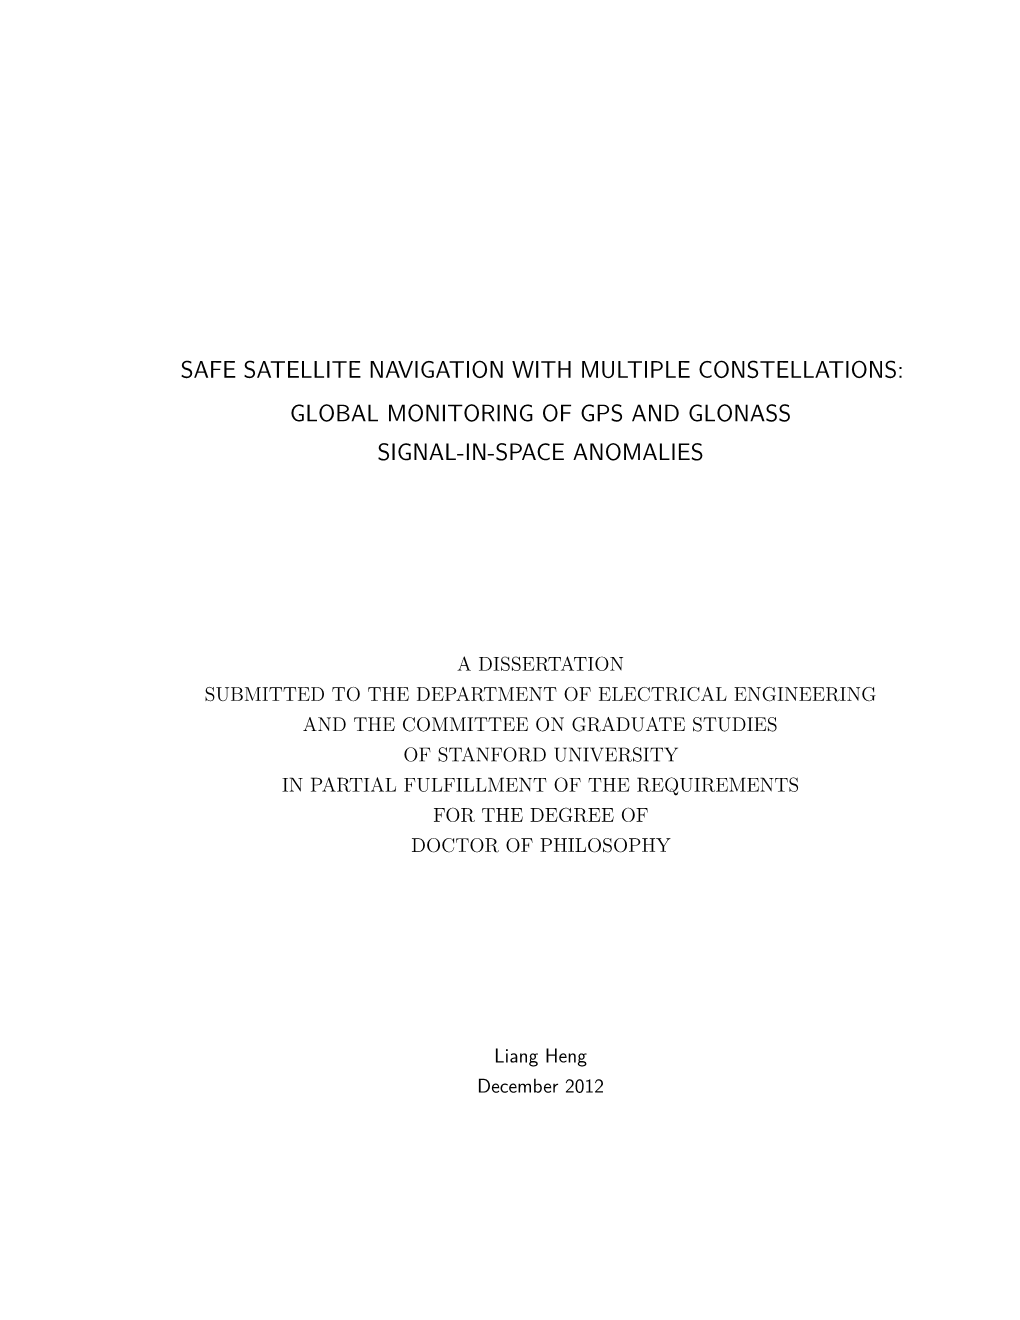 Safe Satellite Navigation with Multiple Constellations: Global Monitoring of Gps and Glonass Signal-In-Space Anomalies